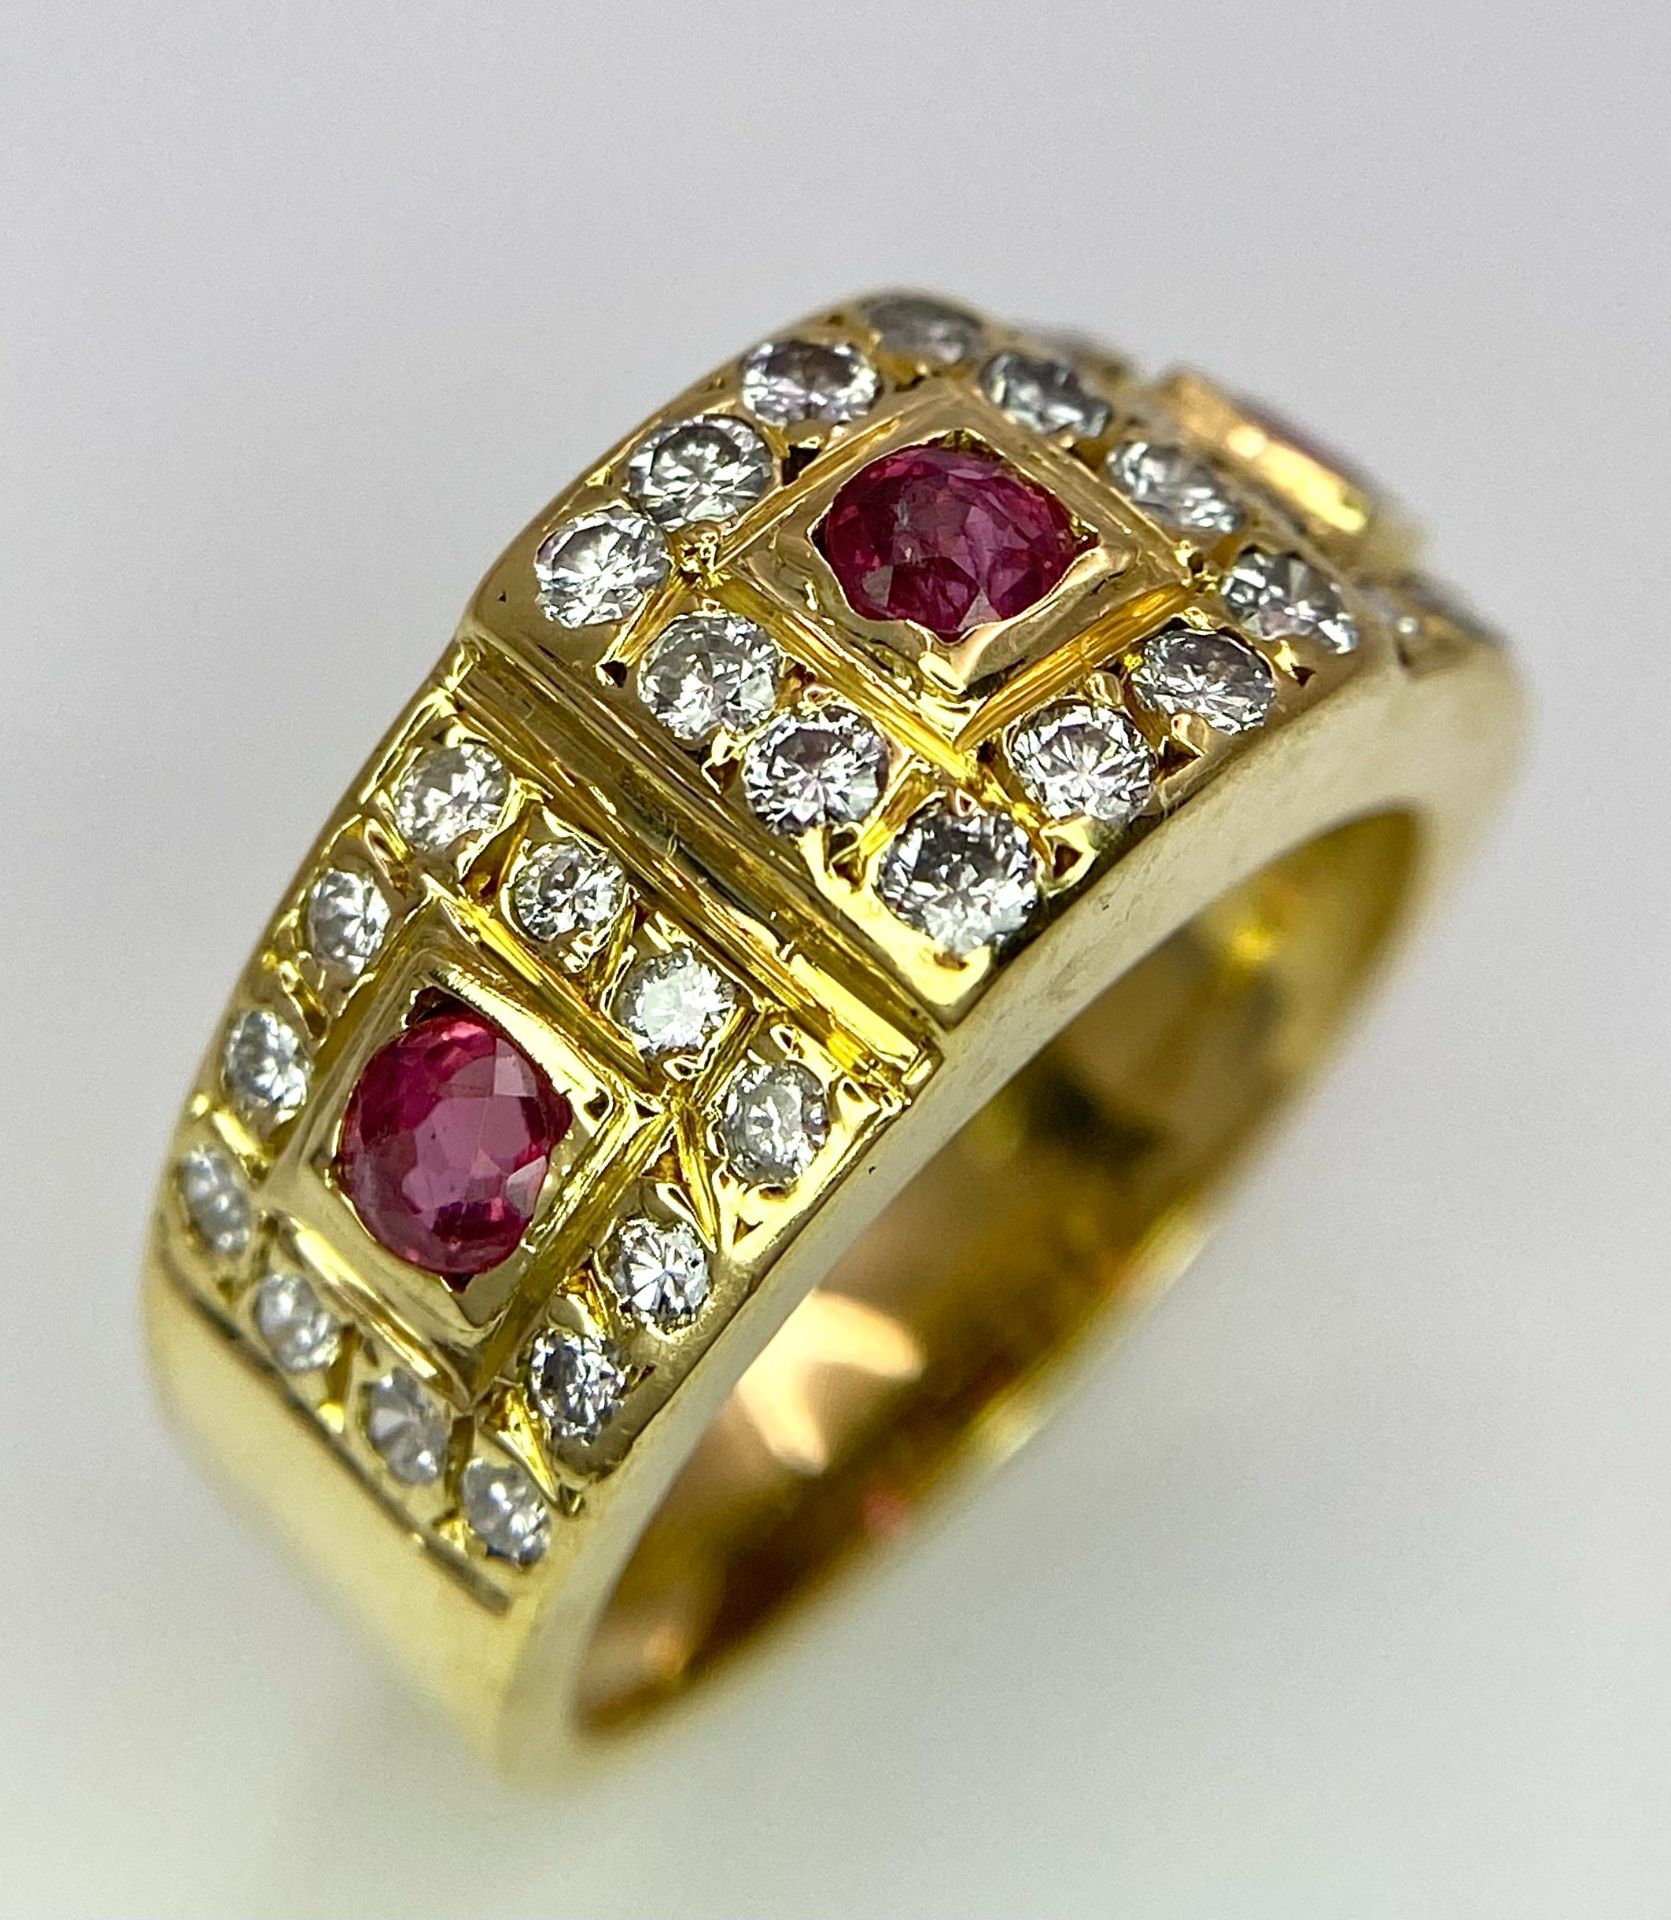 AN 18K YELLOW GOLD DIAMOND & RUBY RING. 0.60ctw, size K, 6.8g total weight. Ref: SC 8072 - Image 3 of 9